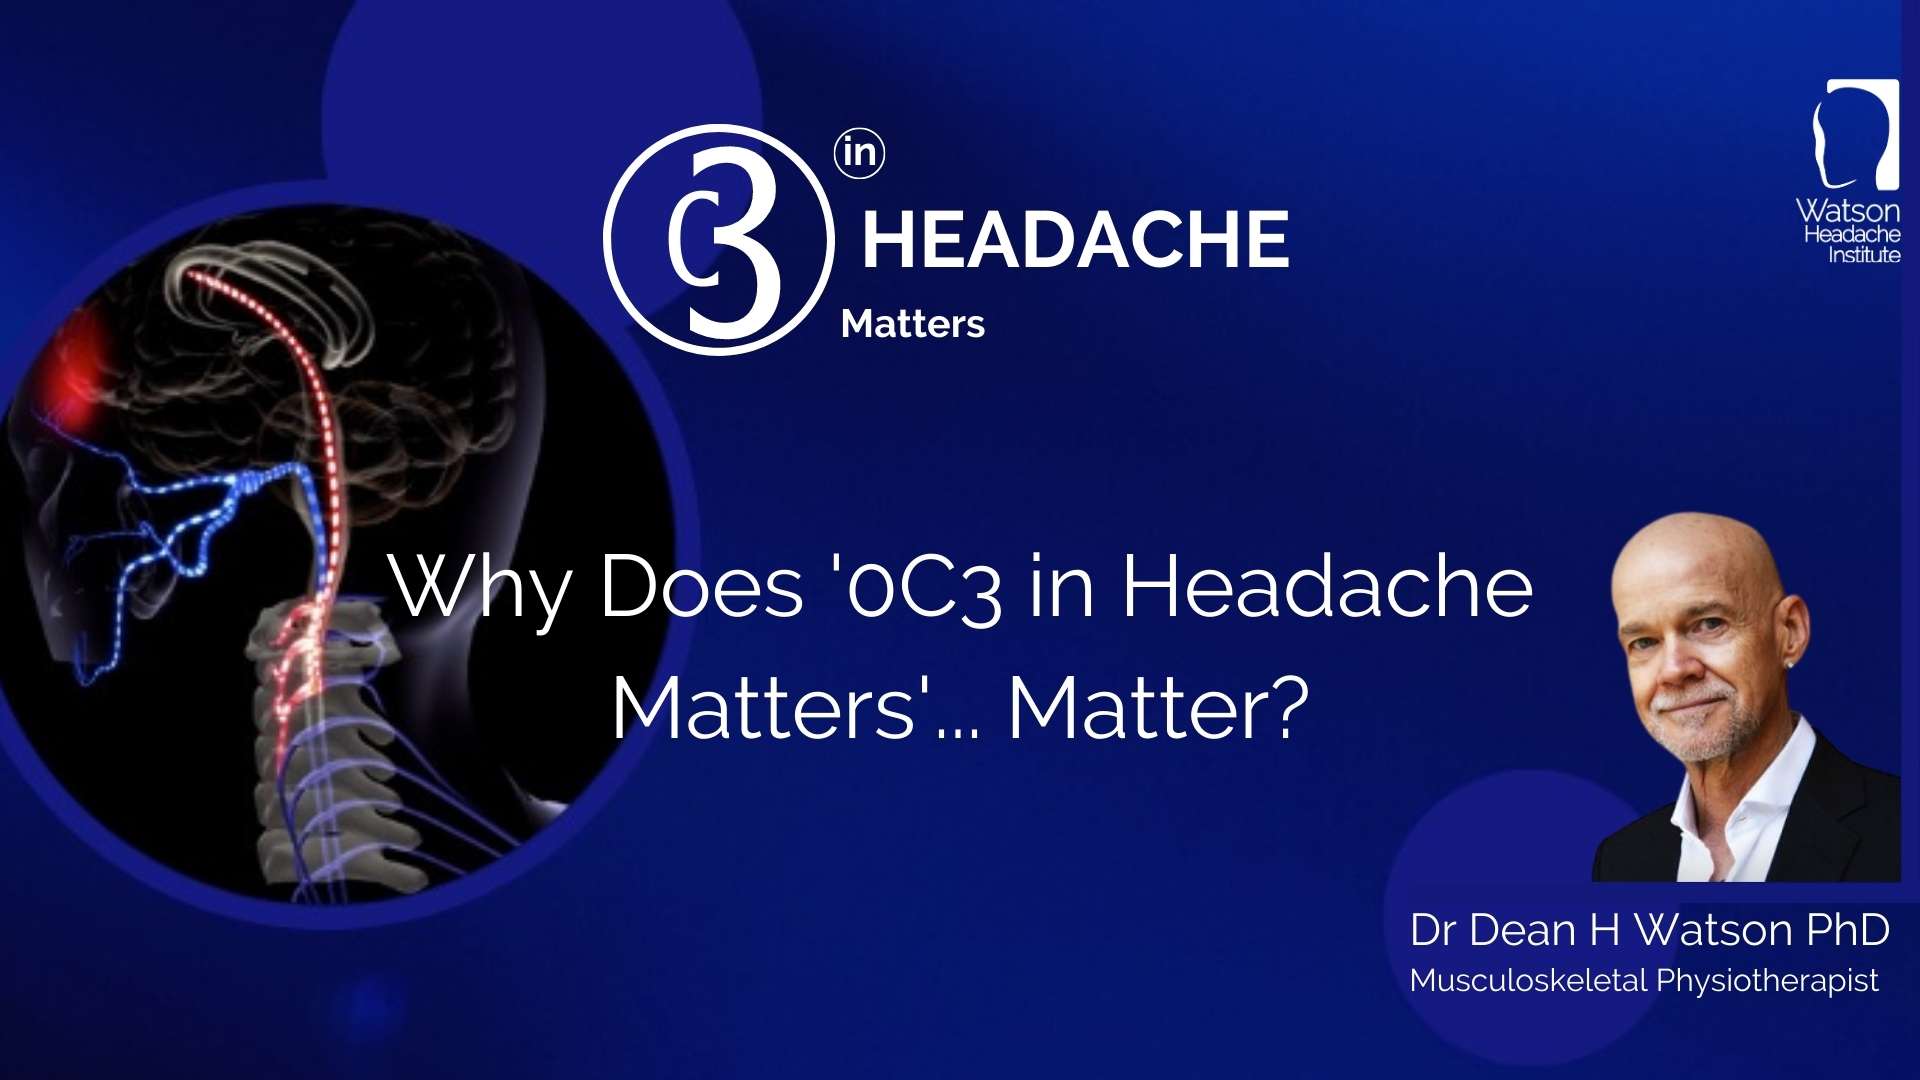 Why Does 0C3 in Headache Matters... Matter?